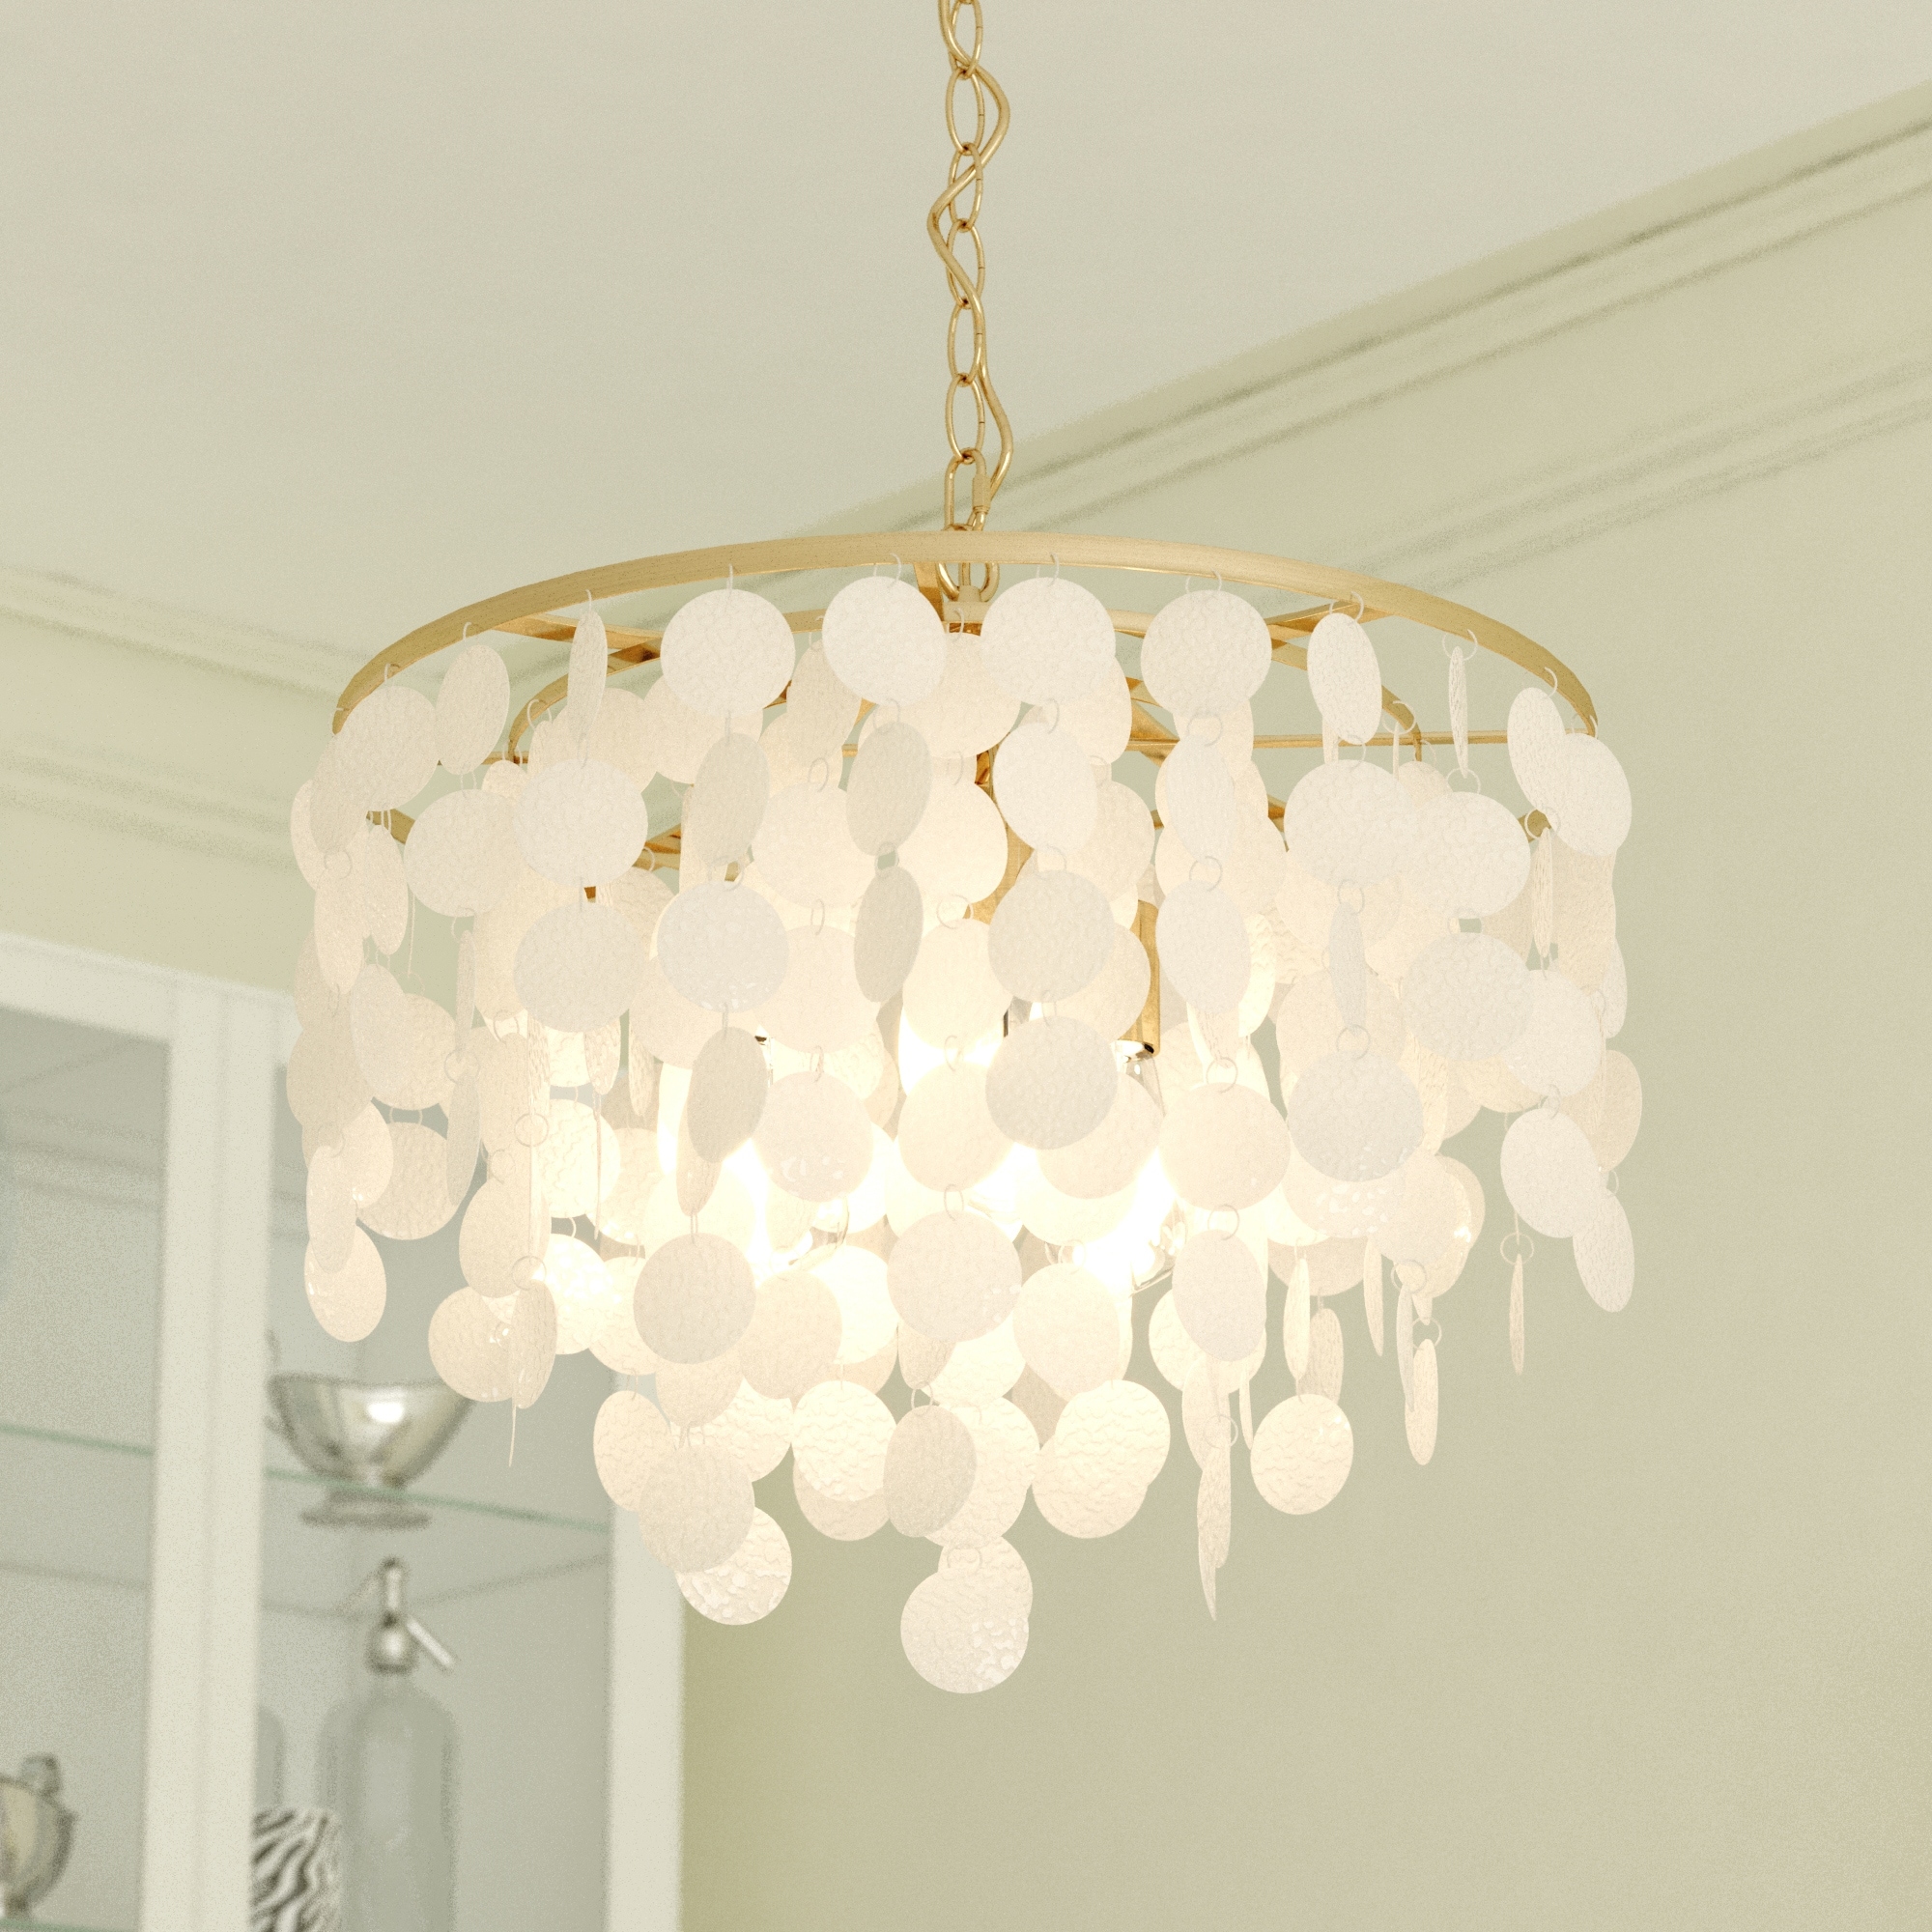 Elsa Light Gold Brass Modern Coastal Glam Pendant Fixture with Capiz  Shells 19.75-in W x 18.5-in H x 19.75-in D Bed Bath  Beyond 38054013